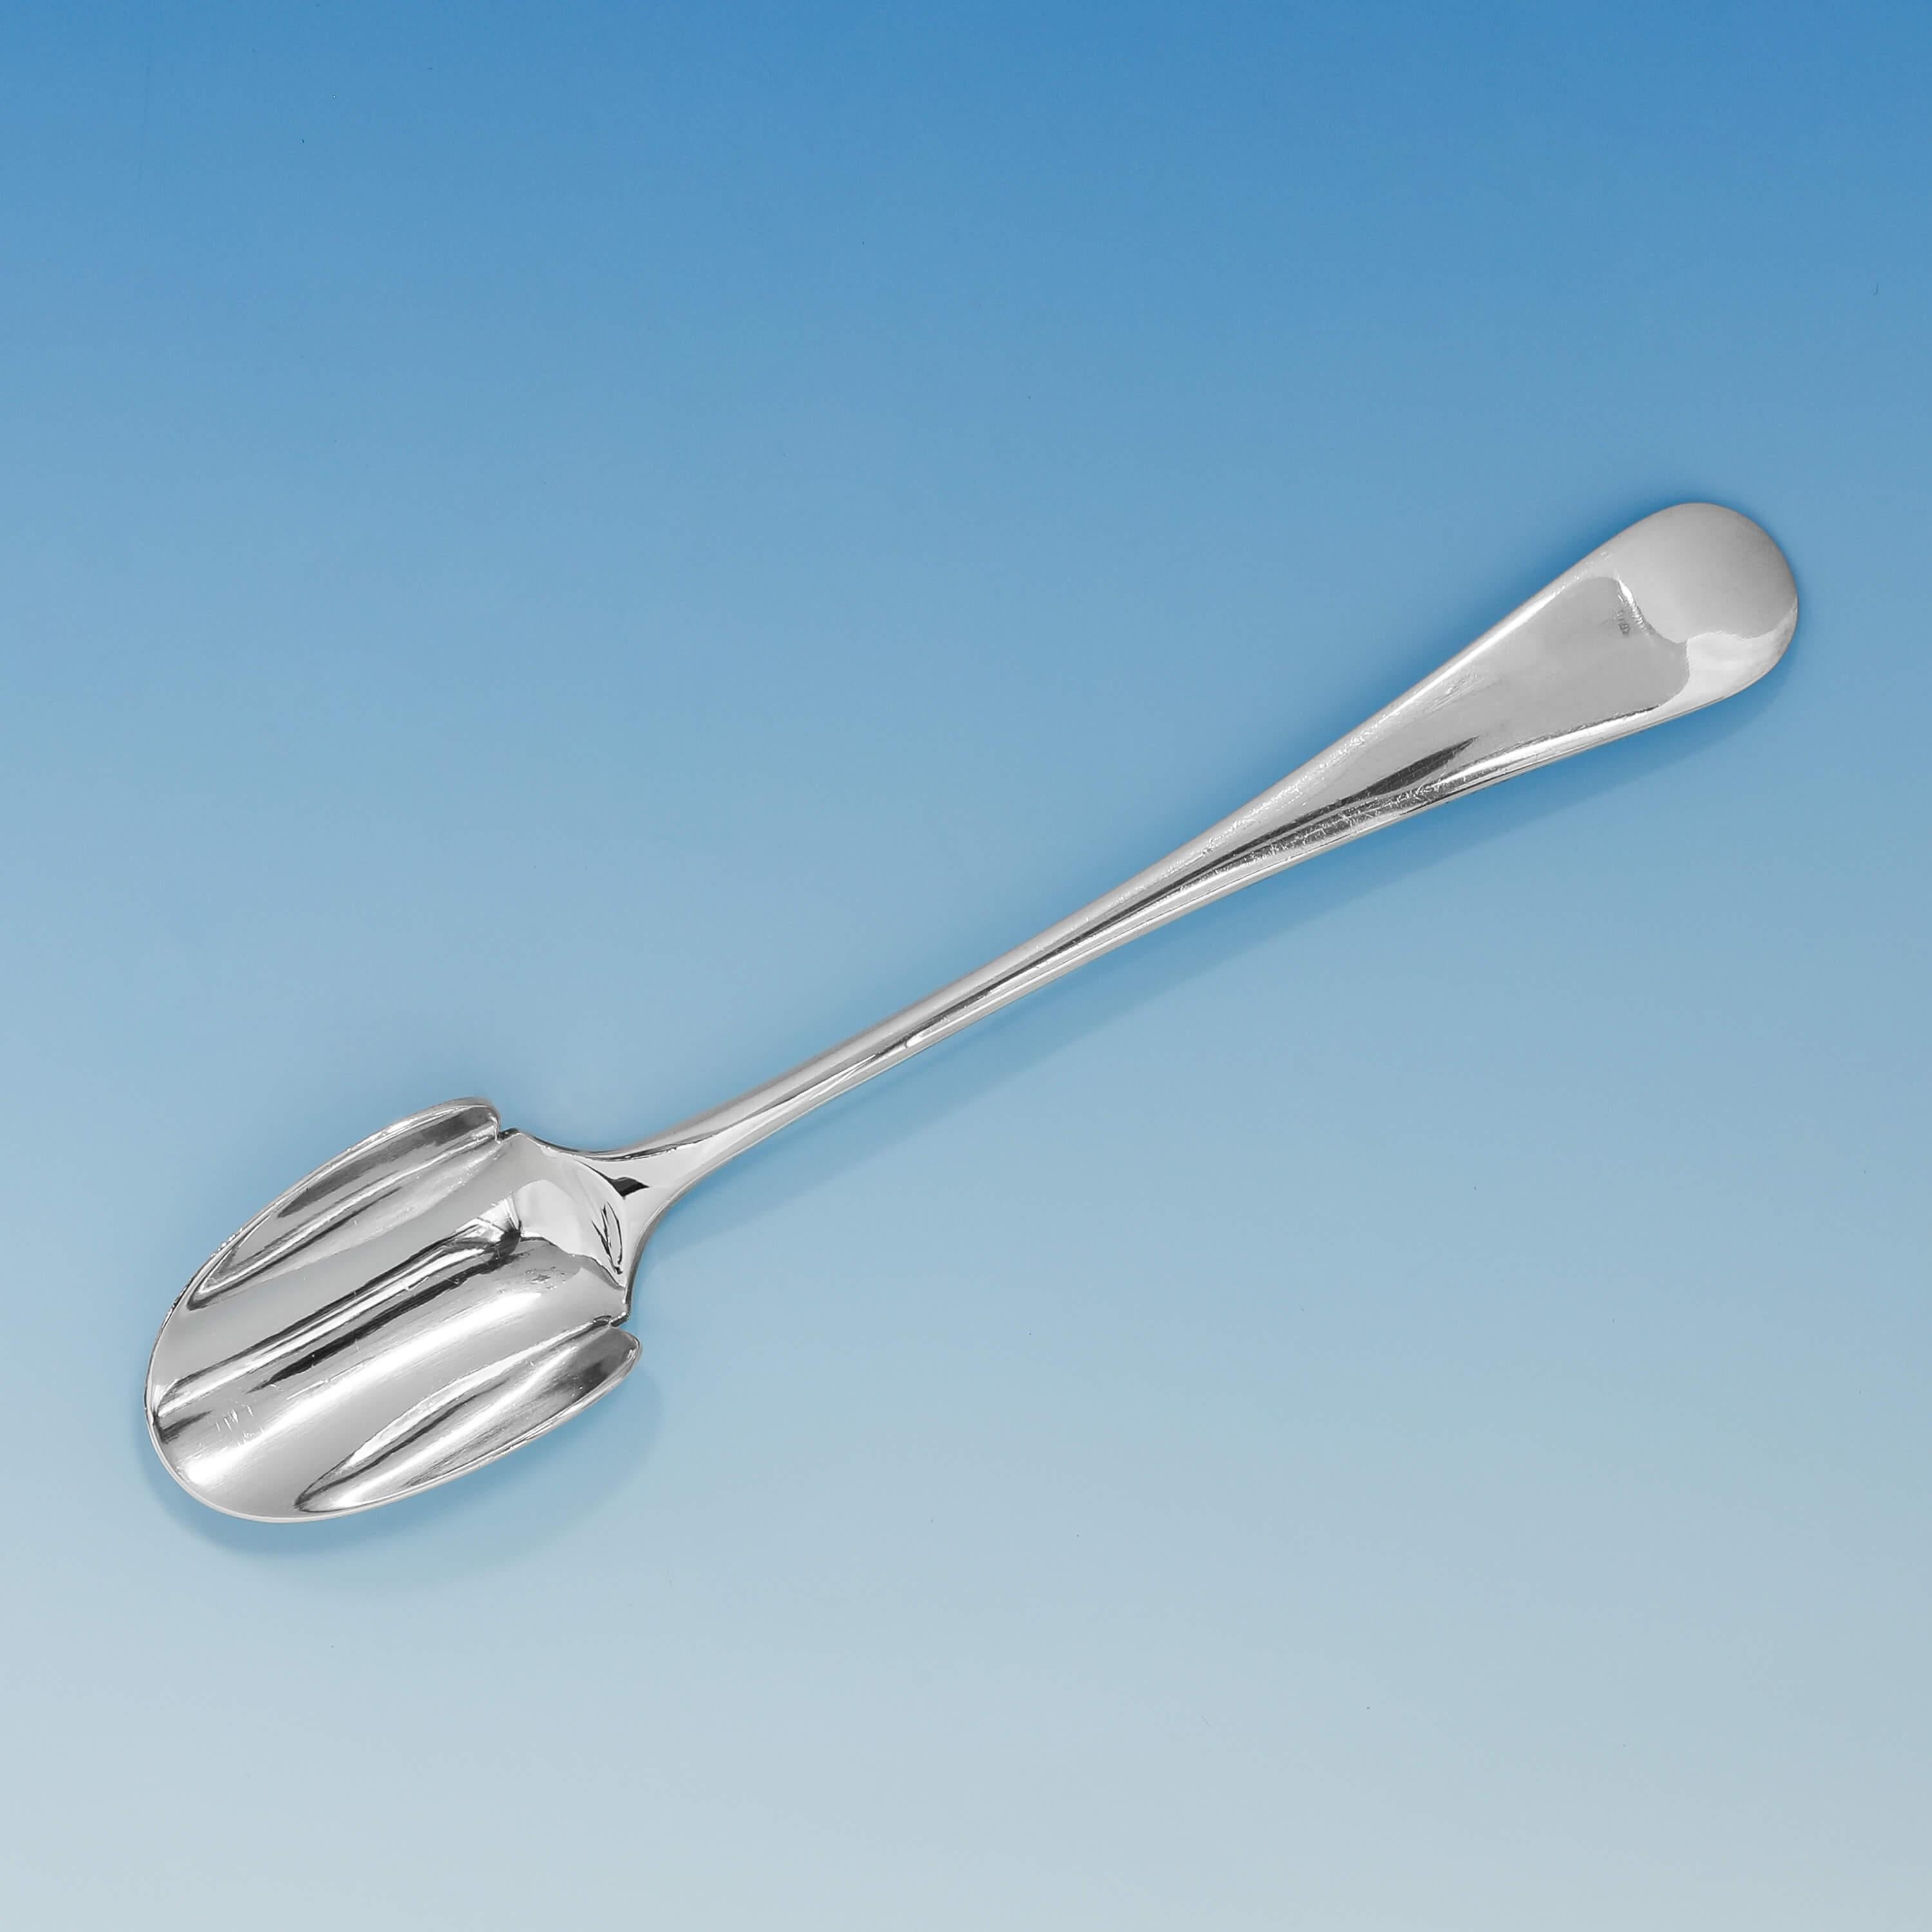 Hallmarked in sheffield in 1938 by William Hutton & Sons, this handsome, sterling silver stilton scoop, is in 'Old English' pattern. The stilton scoop measures 8